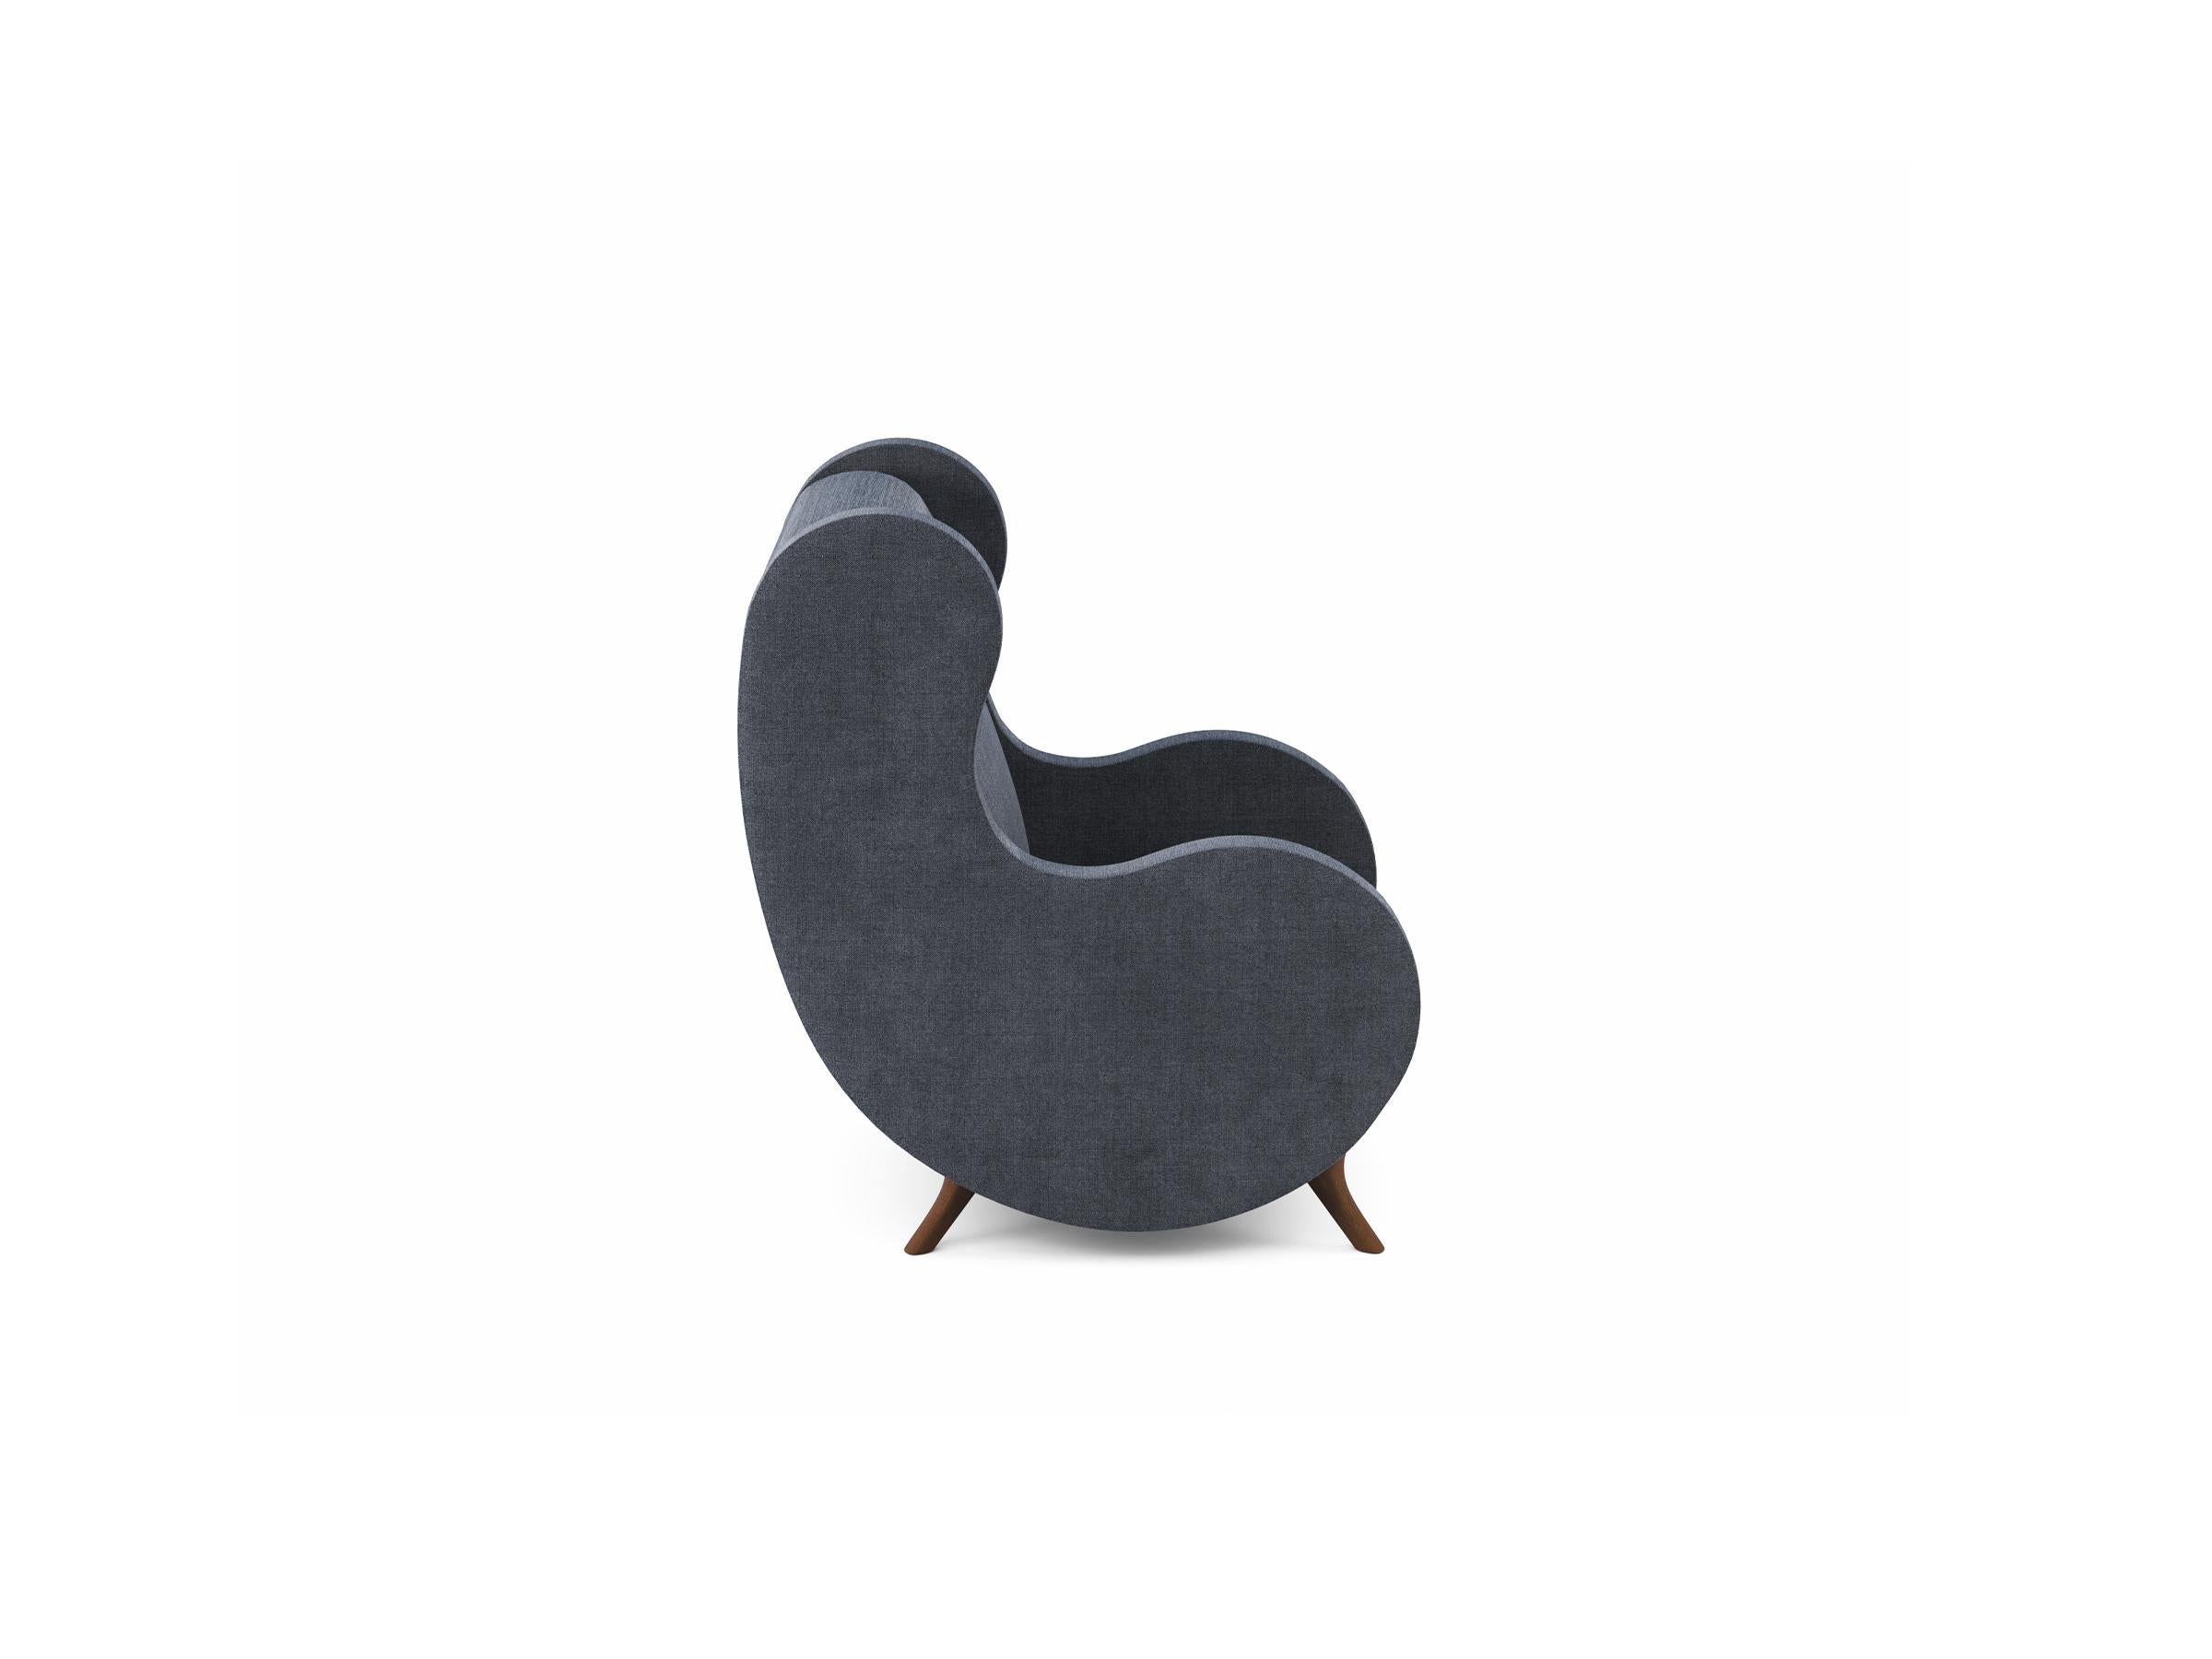 A redesigned iconic piece by Lazzoni. The new Relax armchair offers a flowy look with its rounded lines that blend seamlessly and form a dynamic silhouette that takes the spotlight.With its supportive and ergonomic cushions, Relax Armchair will